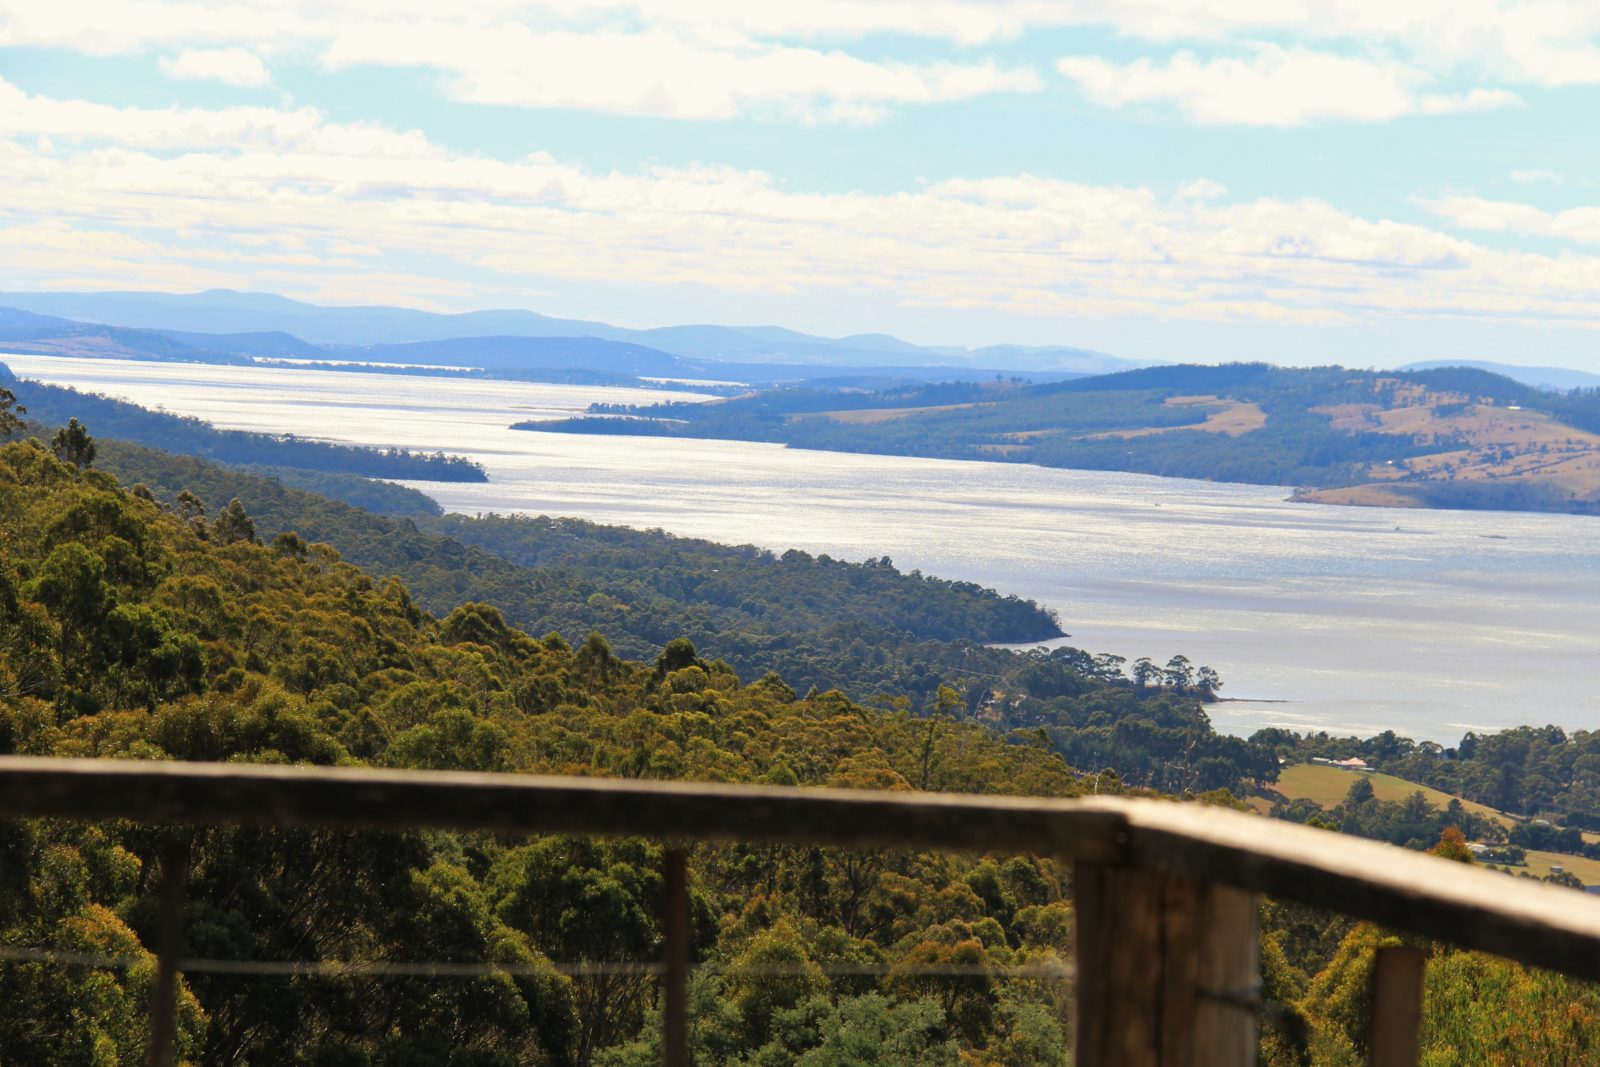 Bruny Island and D'entrecasteaux Channel from the balcony